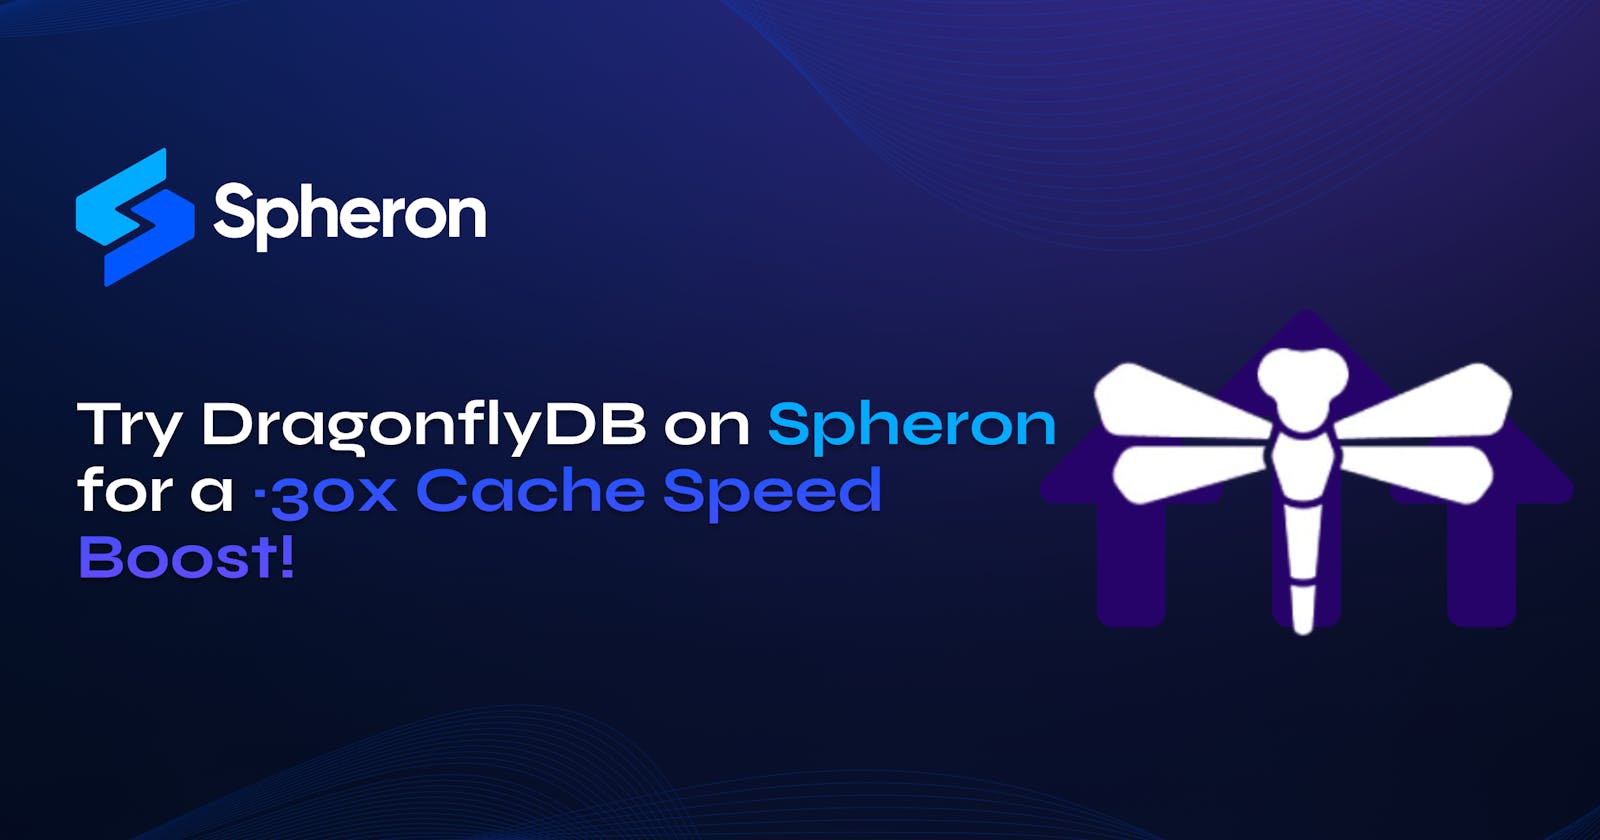 Try DragonflyDB on Spheron for a ~30x Cache Speed Boost!